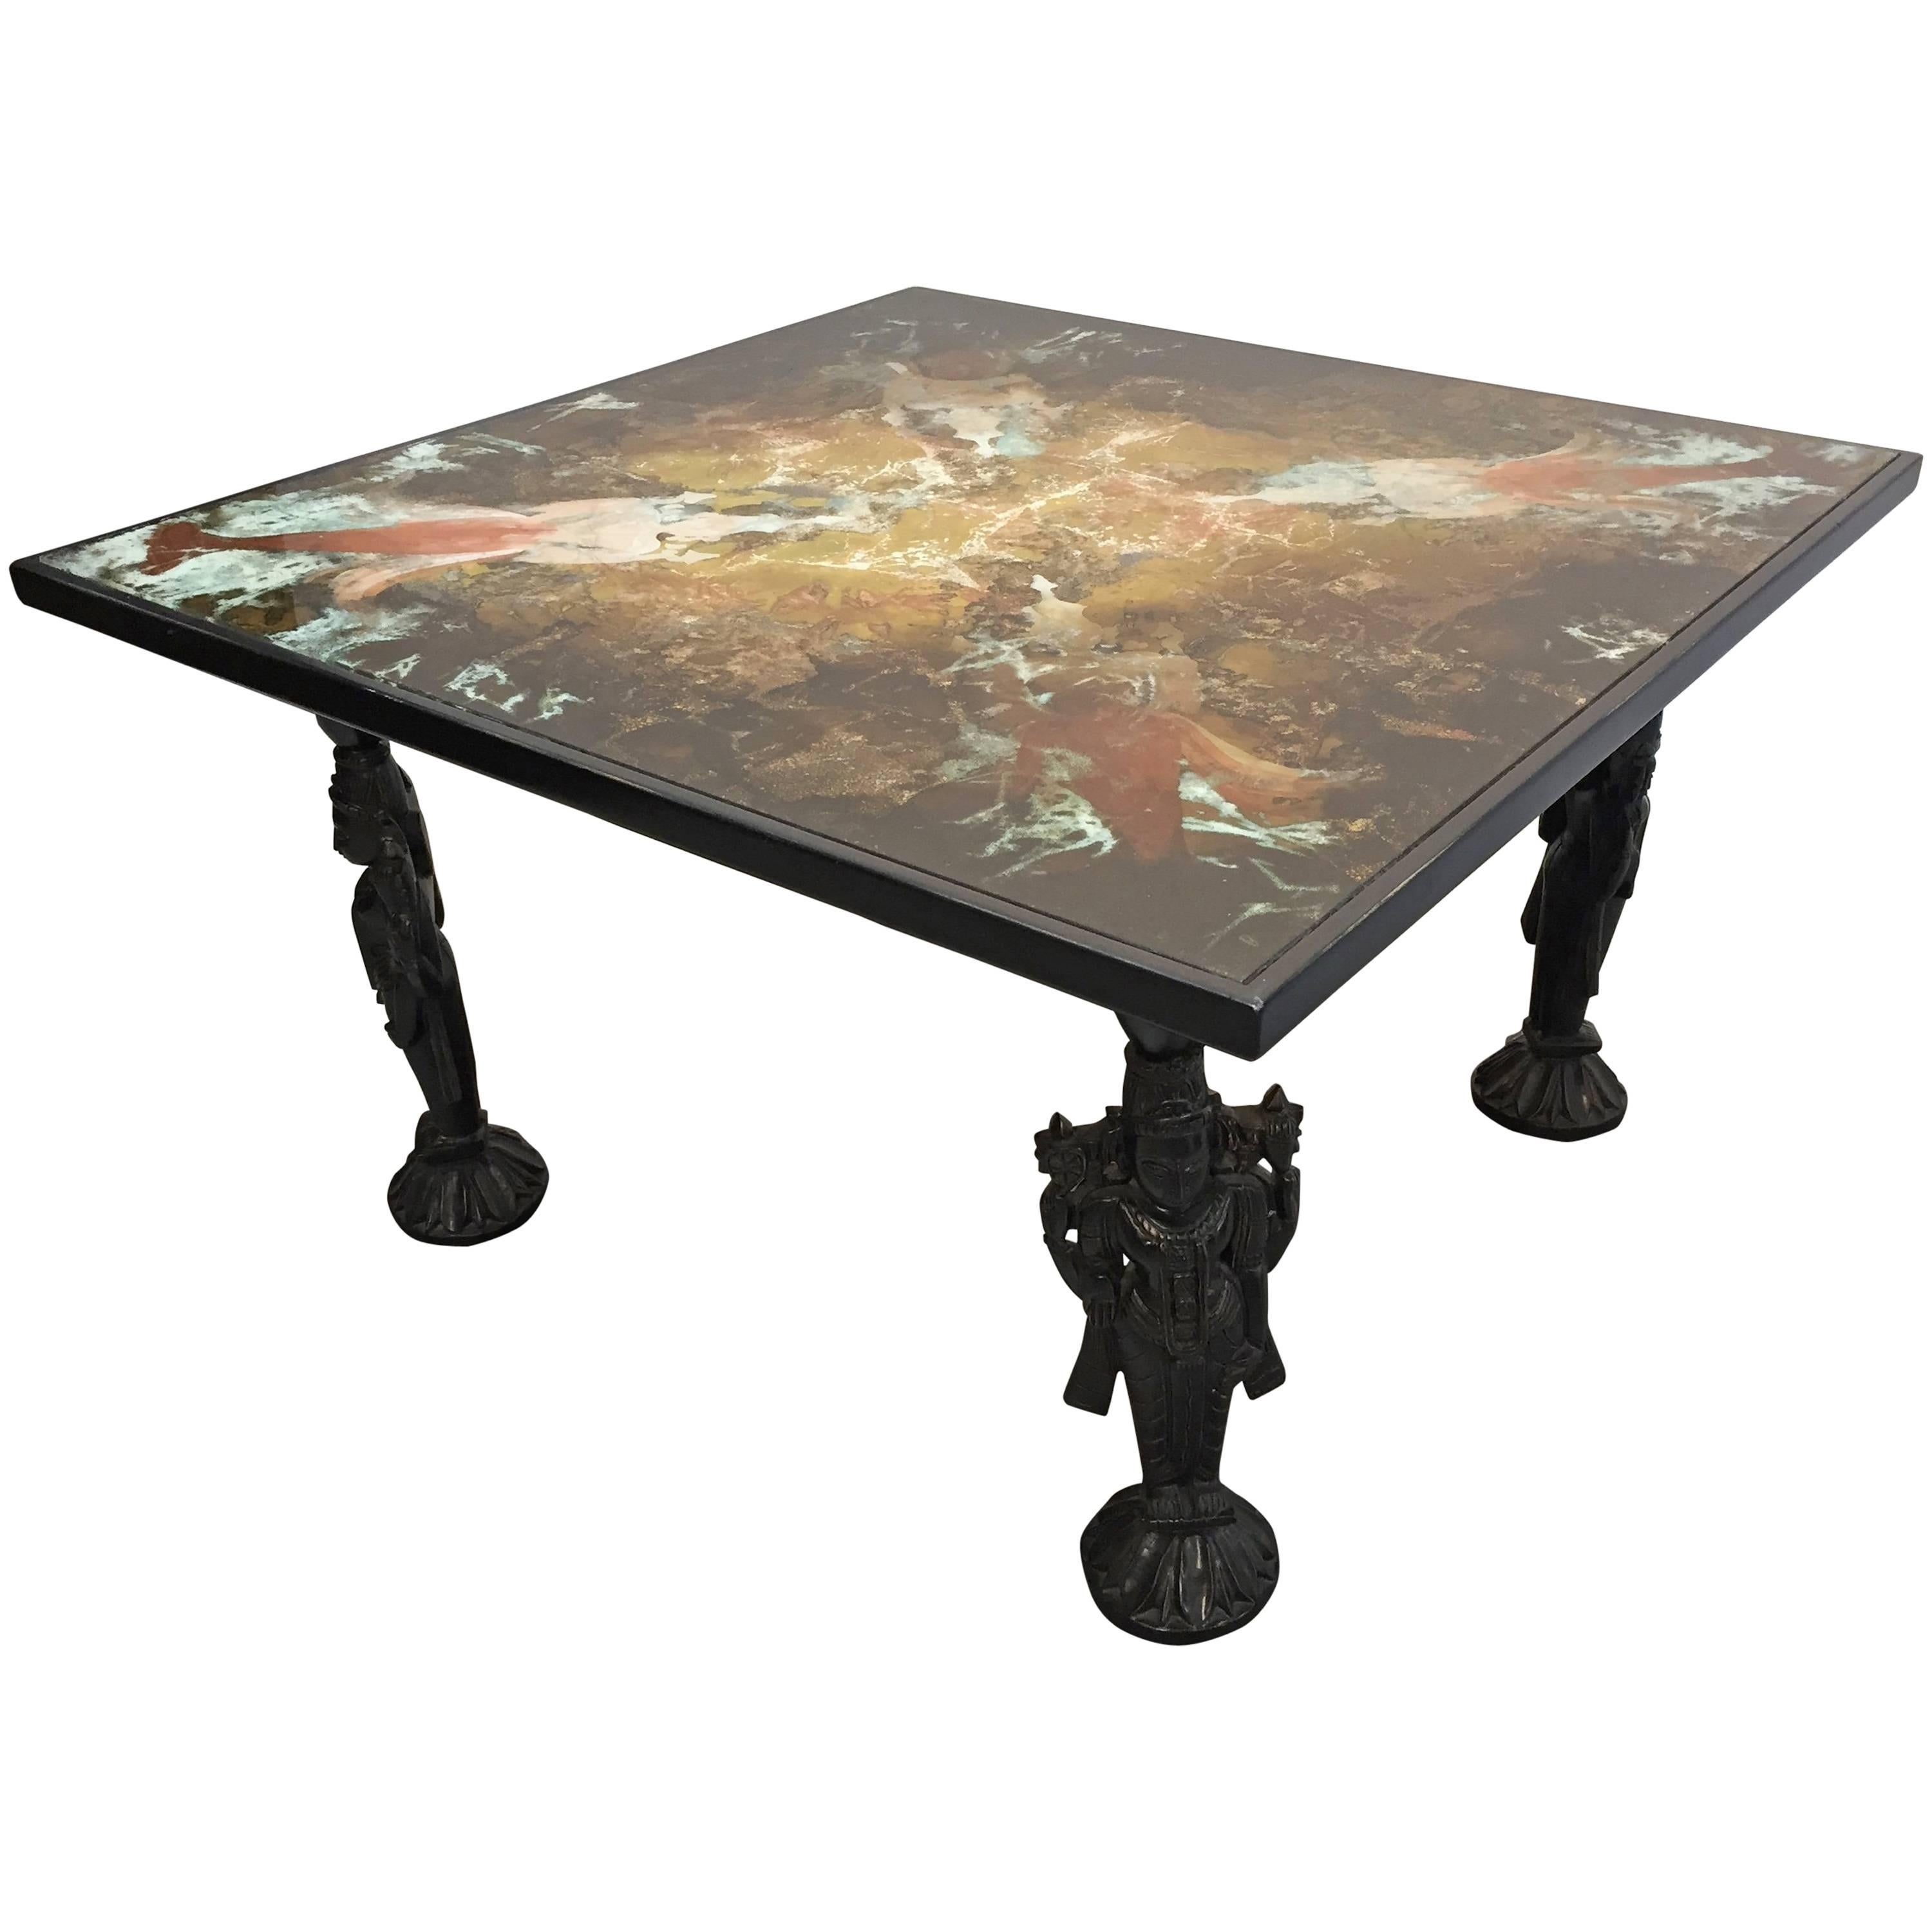 Asian Inspire Coffee Table with Indian God Vishnu on Lotus Stand